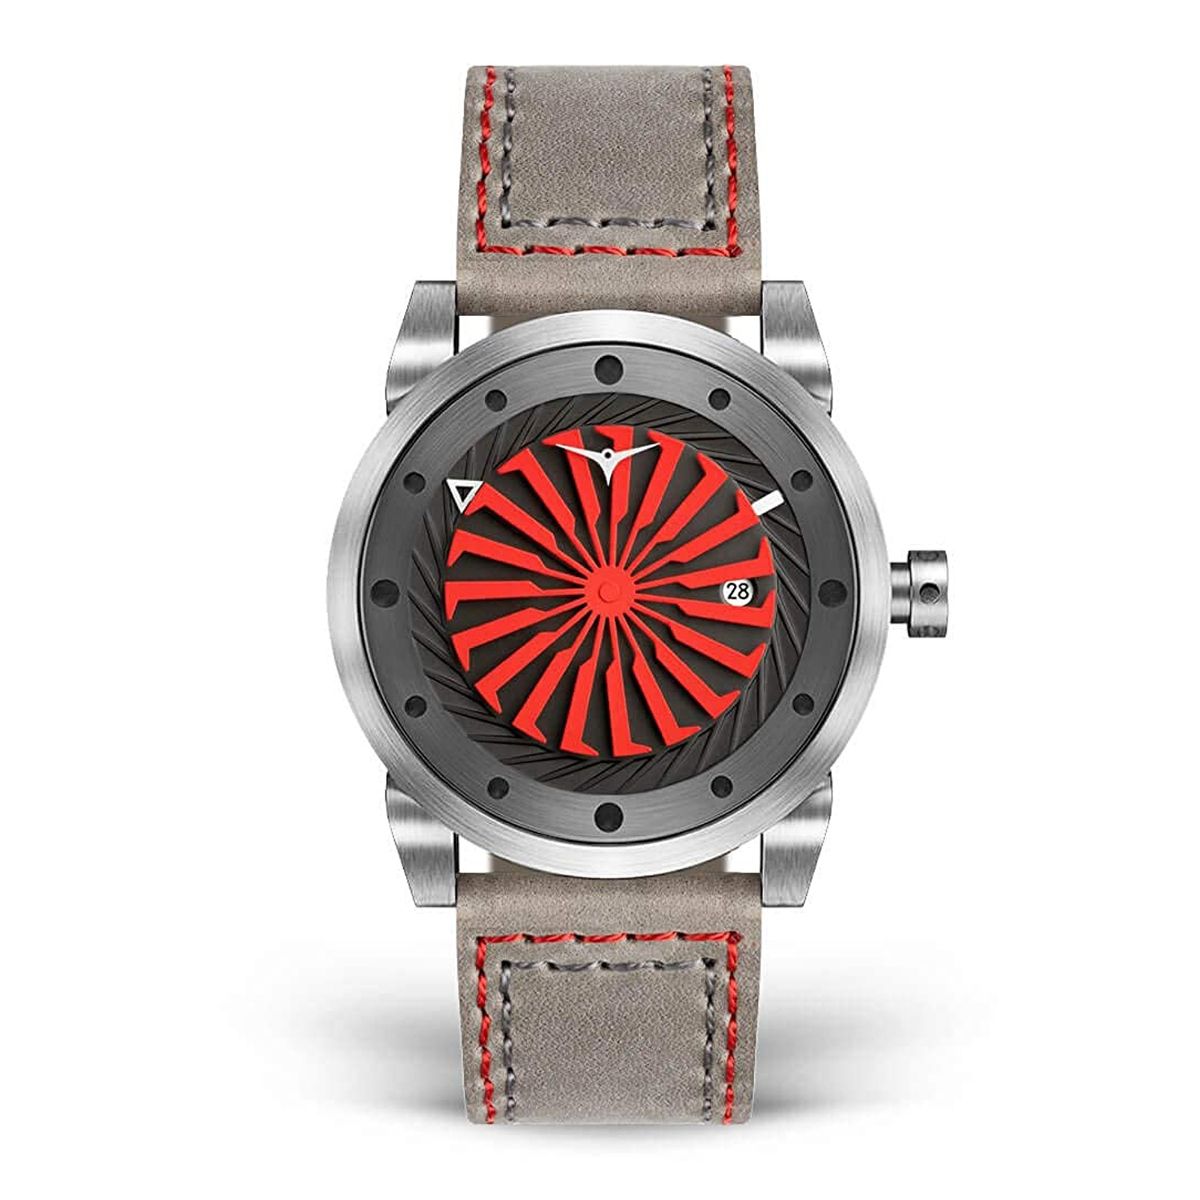 Zinvo Airblade Automatic Soda Carbon | Watches.com